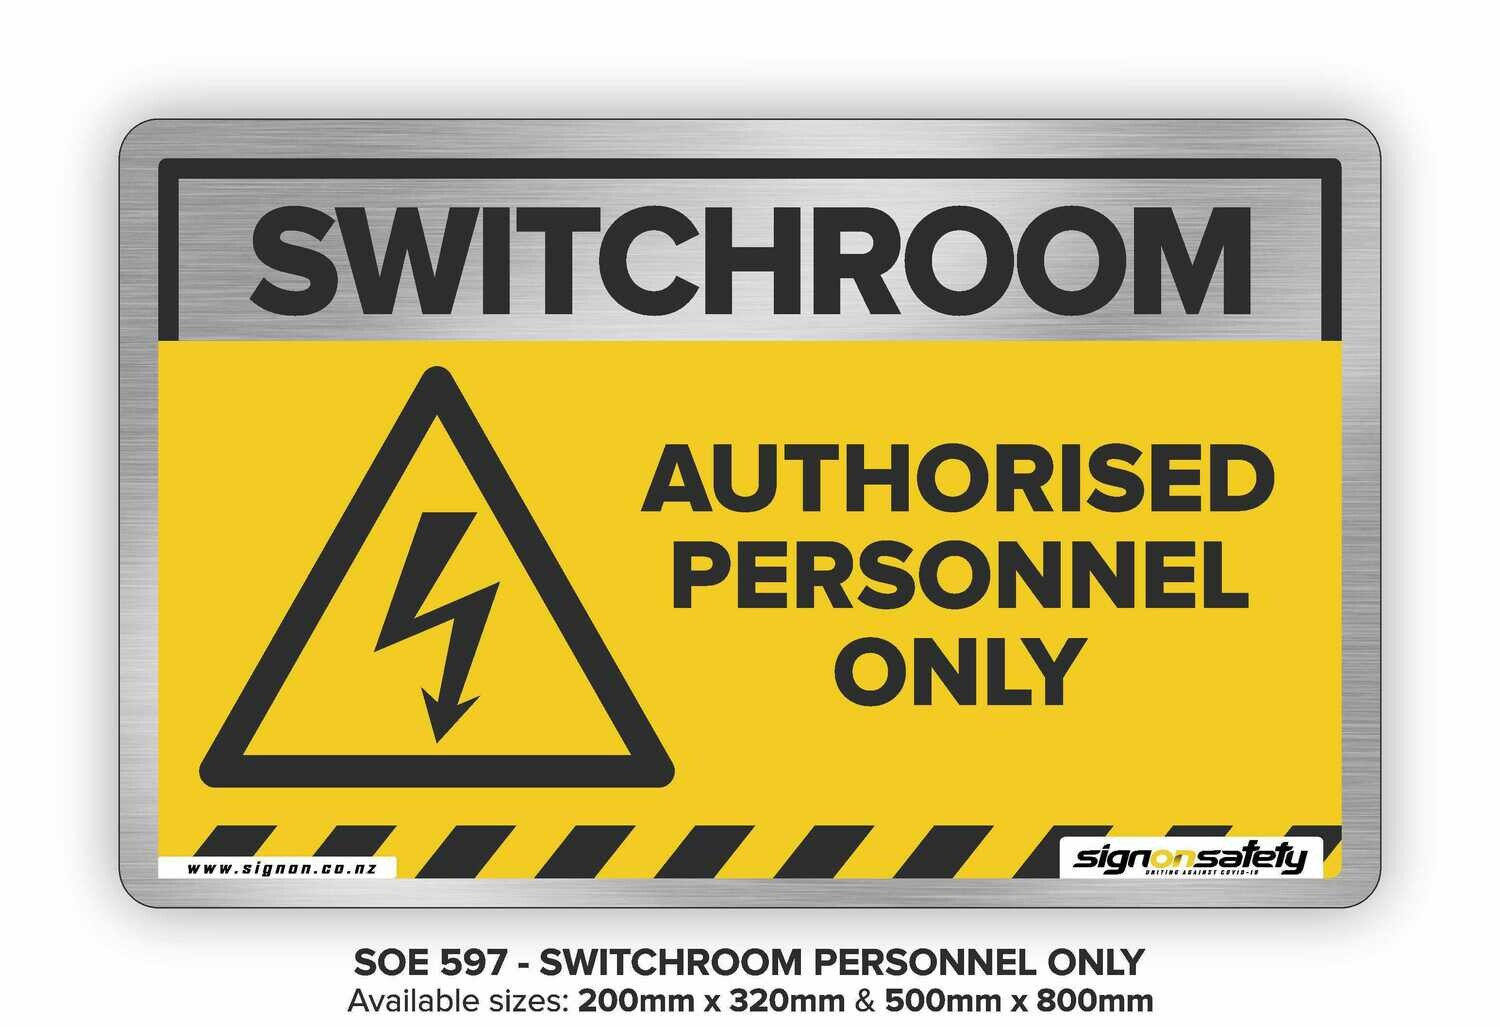 Switchroom - Authorised Personnel Only